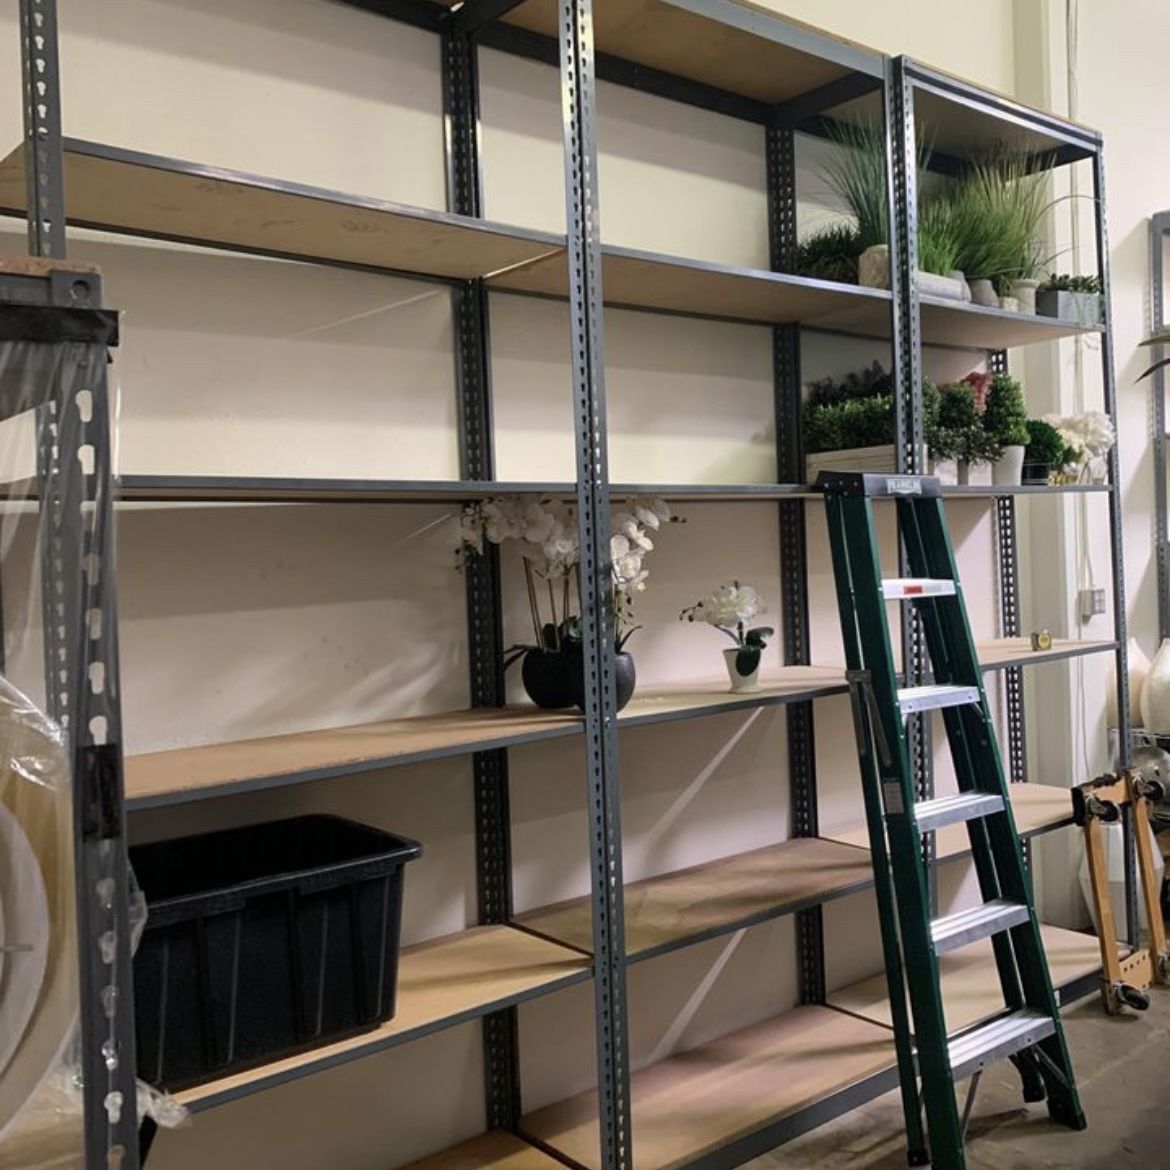 Garage Shelving 48 in W x 18 in D New Industrial Racks Great For Home Office Stronger The Homedepot Lowes Delivery Available